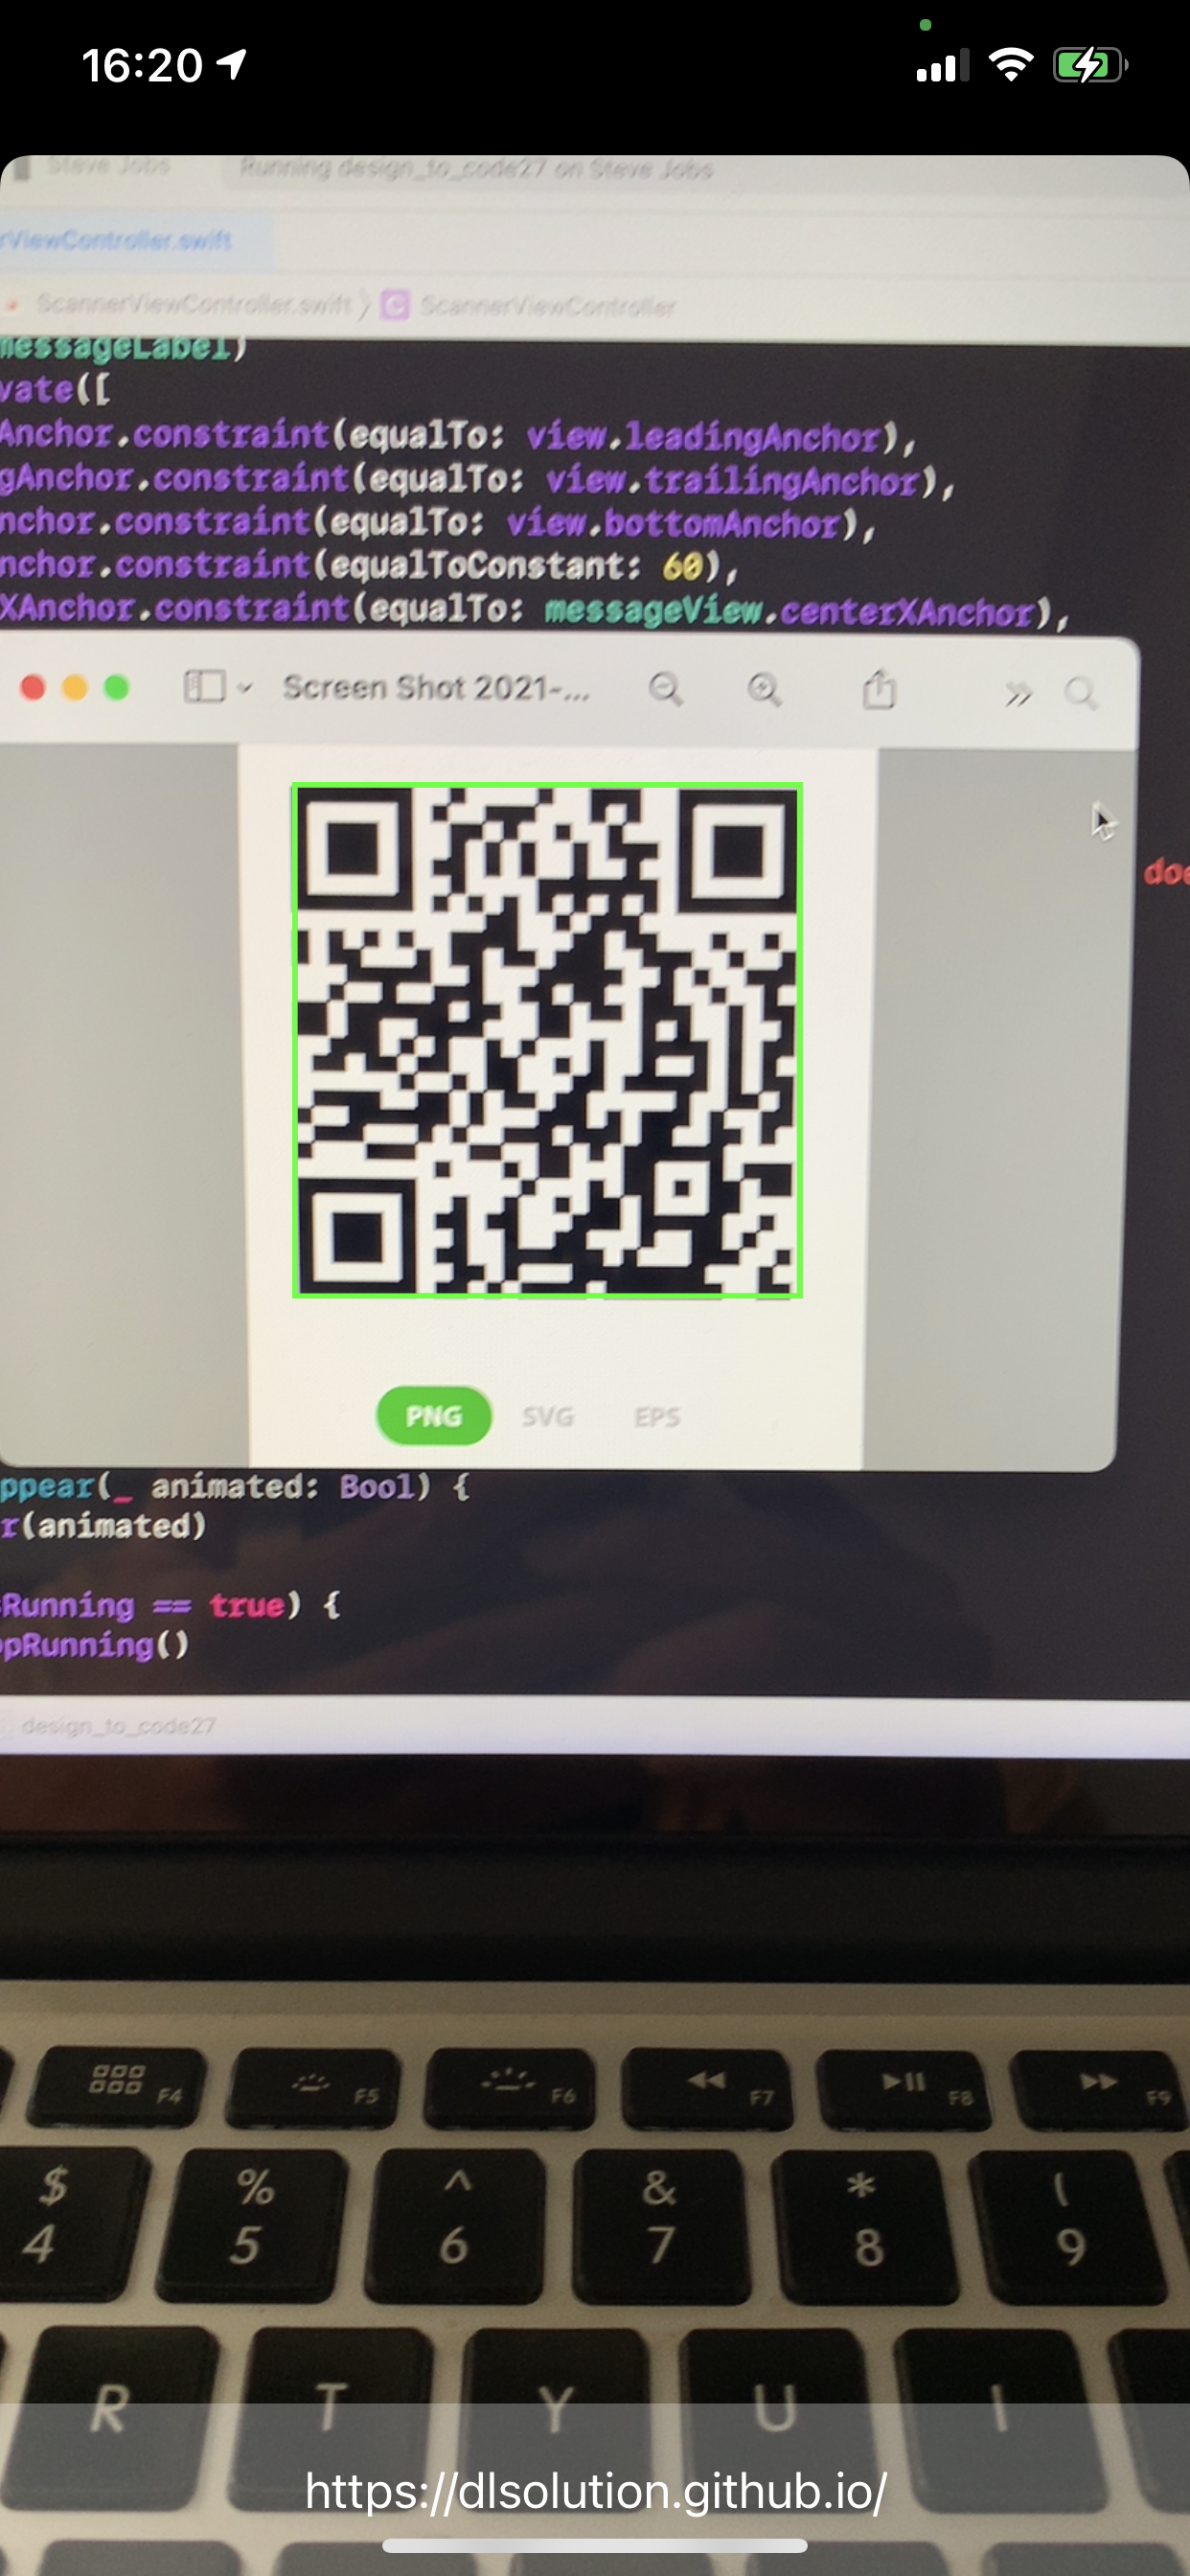 Scanning and decoding QR codes